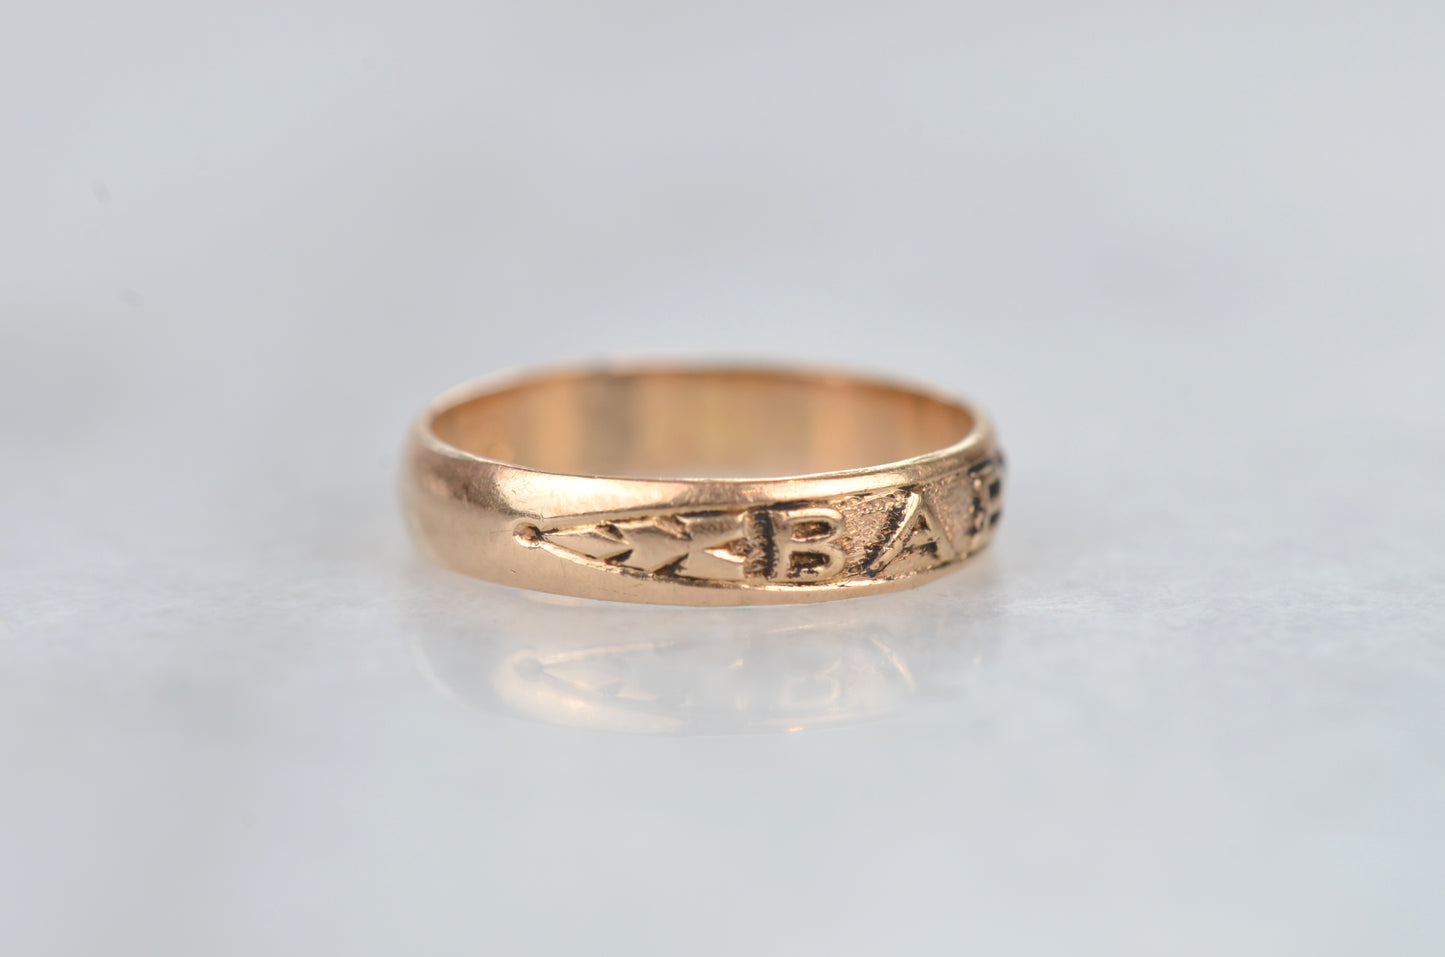 Covetable Antique "Baby" Ring